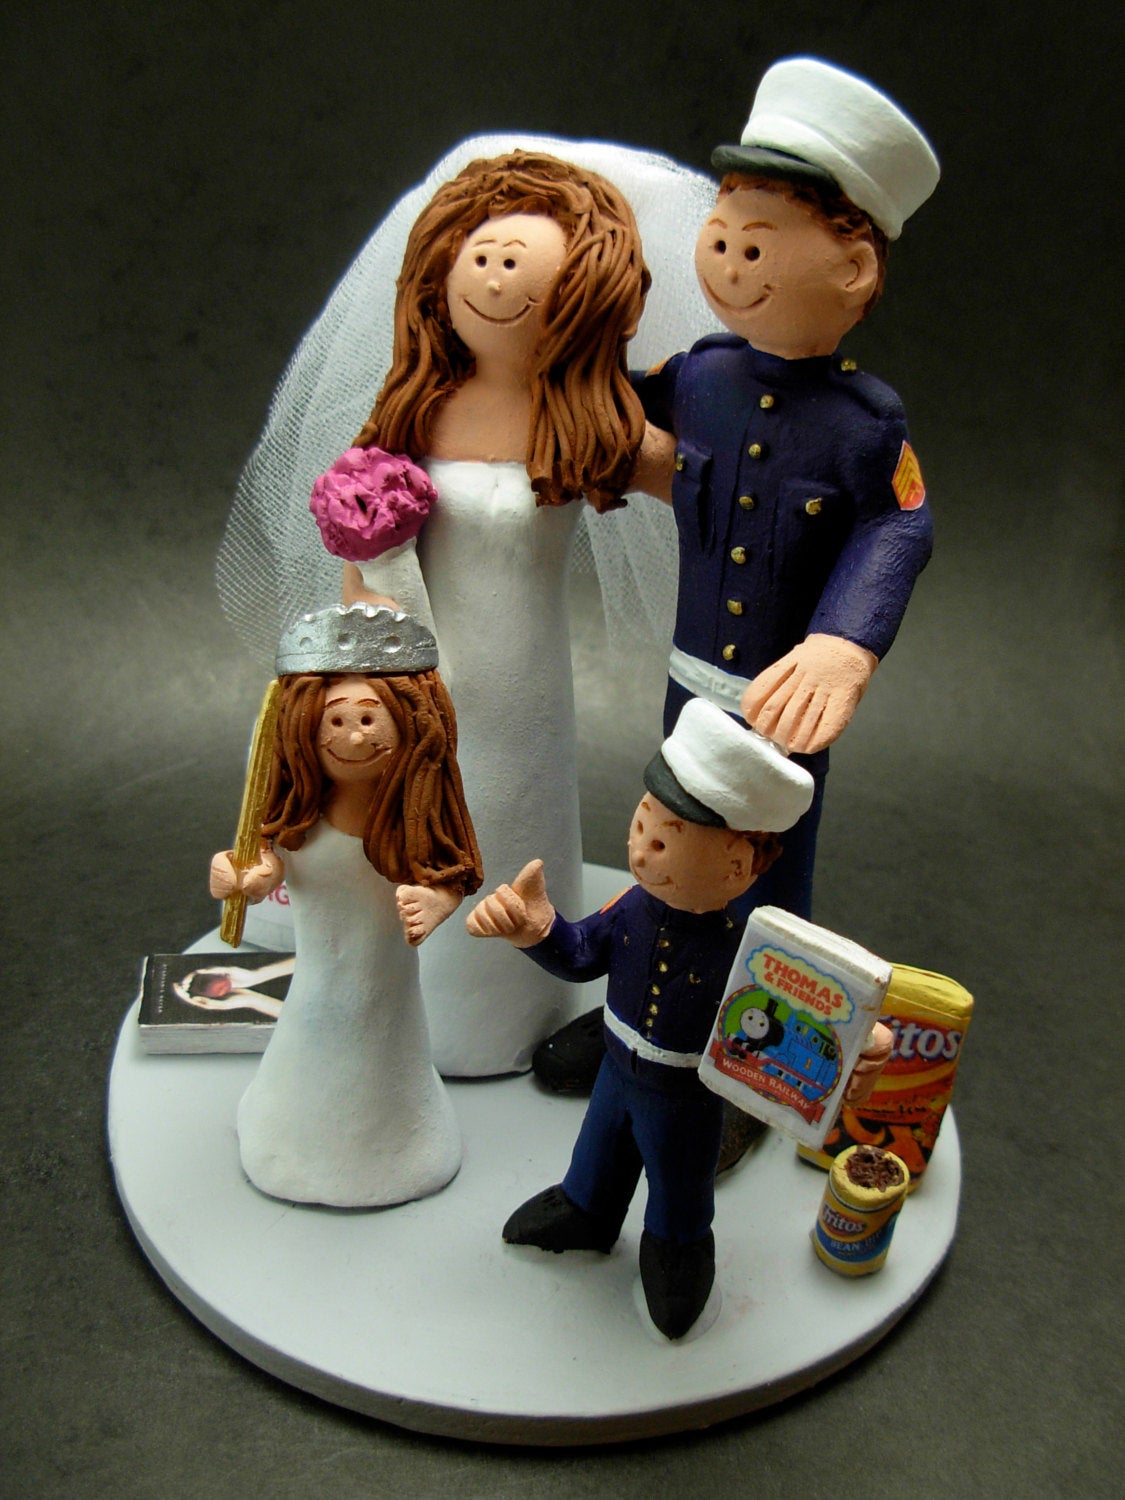 Wedding Cake Topper for a Blended Family, Mixed Family Wedding Cake Topper, Step Family Wedding Cake Topper, Family Wedding Caketopper - iWeddingCakeToppers